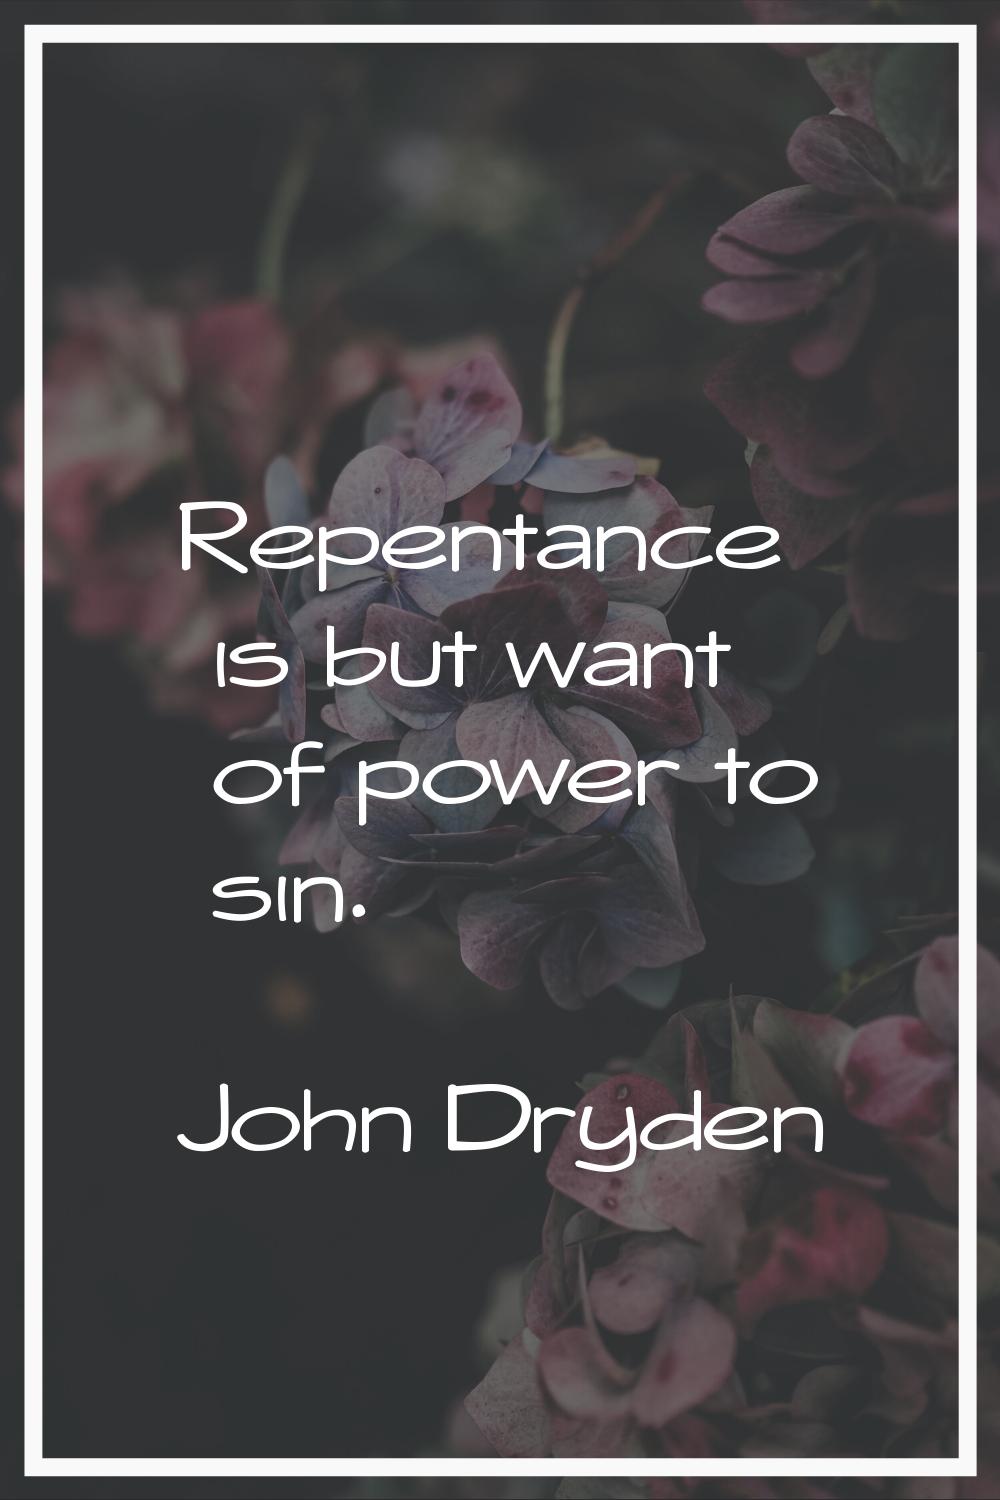 Repentance is but want of power to sin.